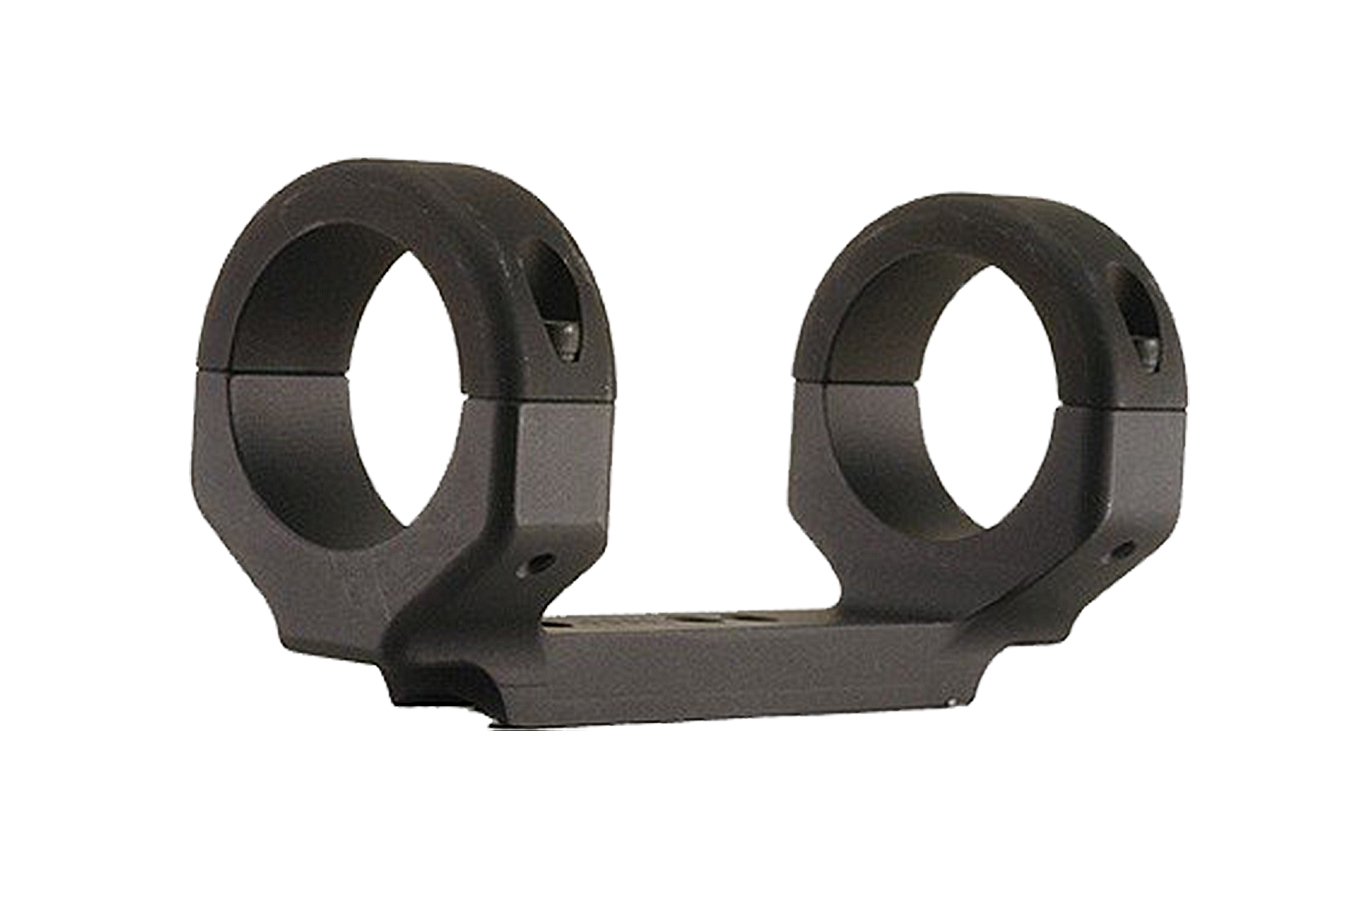 GAME REAPER SCOPE MOUNT/RING COMBO 1 INCH TUBE MEDIUM RINGS 1.06 INCH MOUNT HEIGHT MATTE BLA